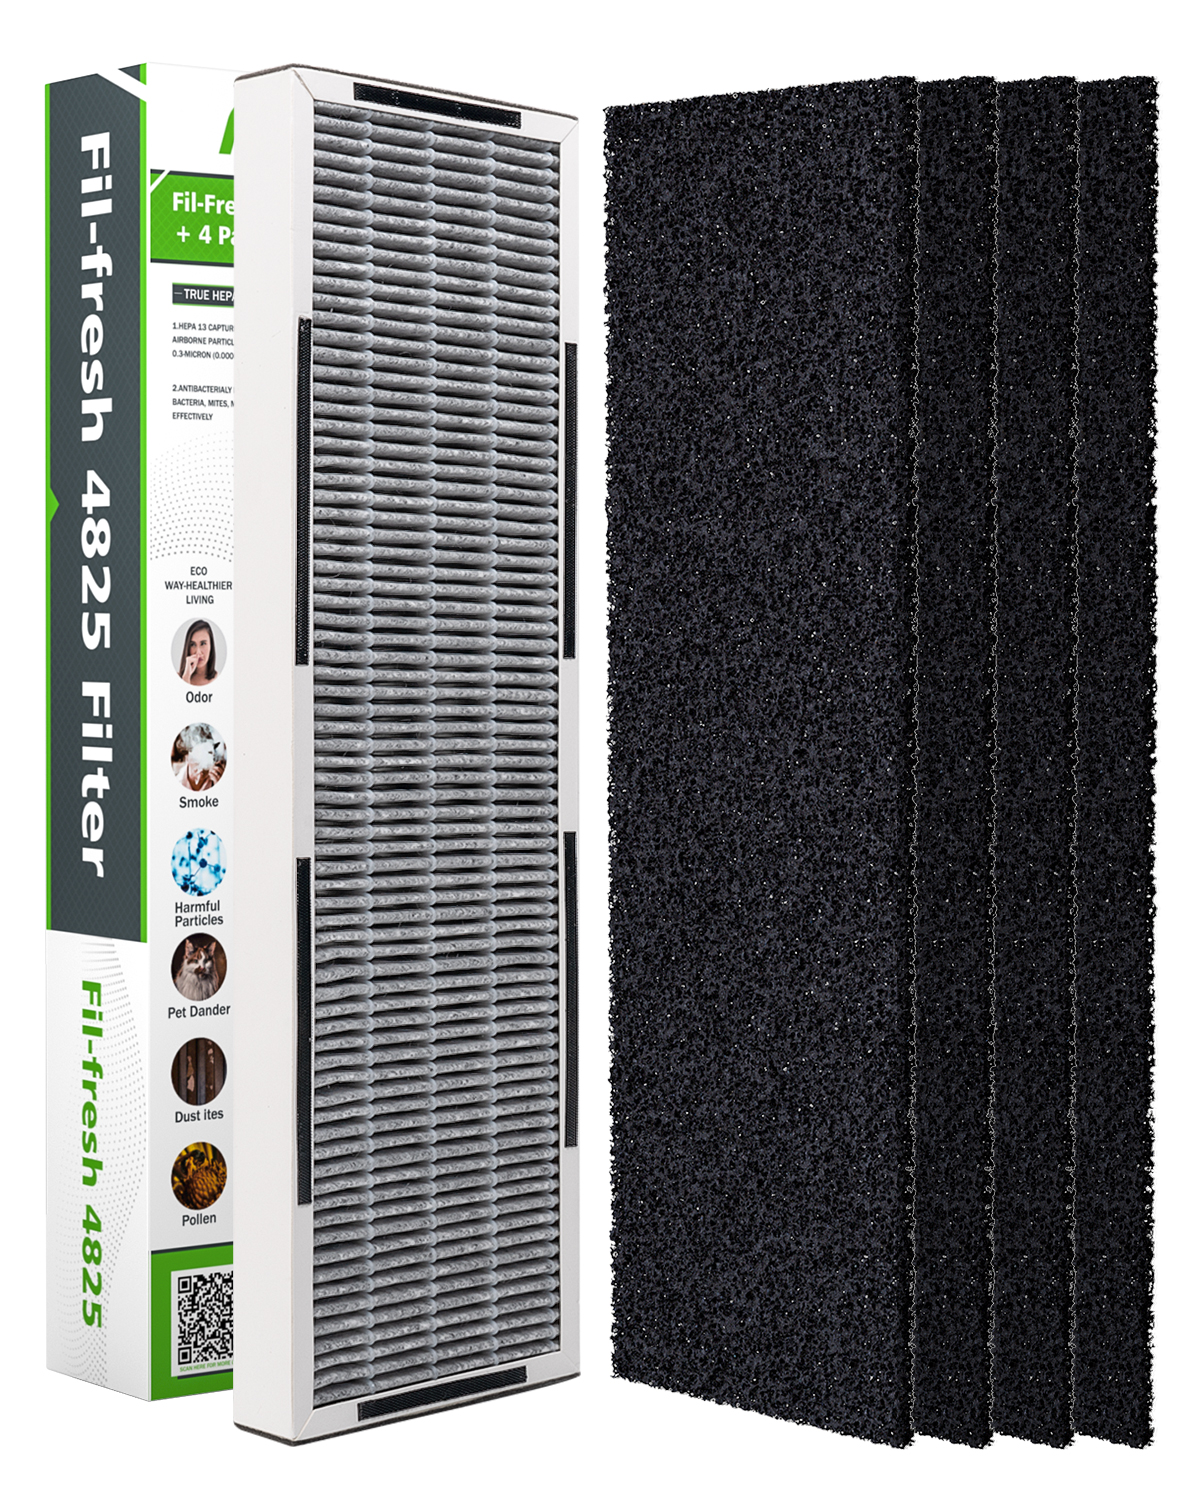 Filfresh Air HEPA Filter B, FLT4825 Filter Replacement for Germ Guardian AC4825 Air Purifier, True HEPA Filter and Carbon Pre Filter Combo Set for 1-Year Use